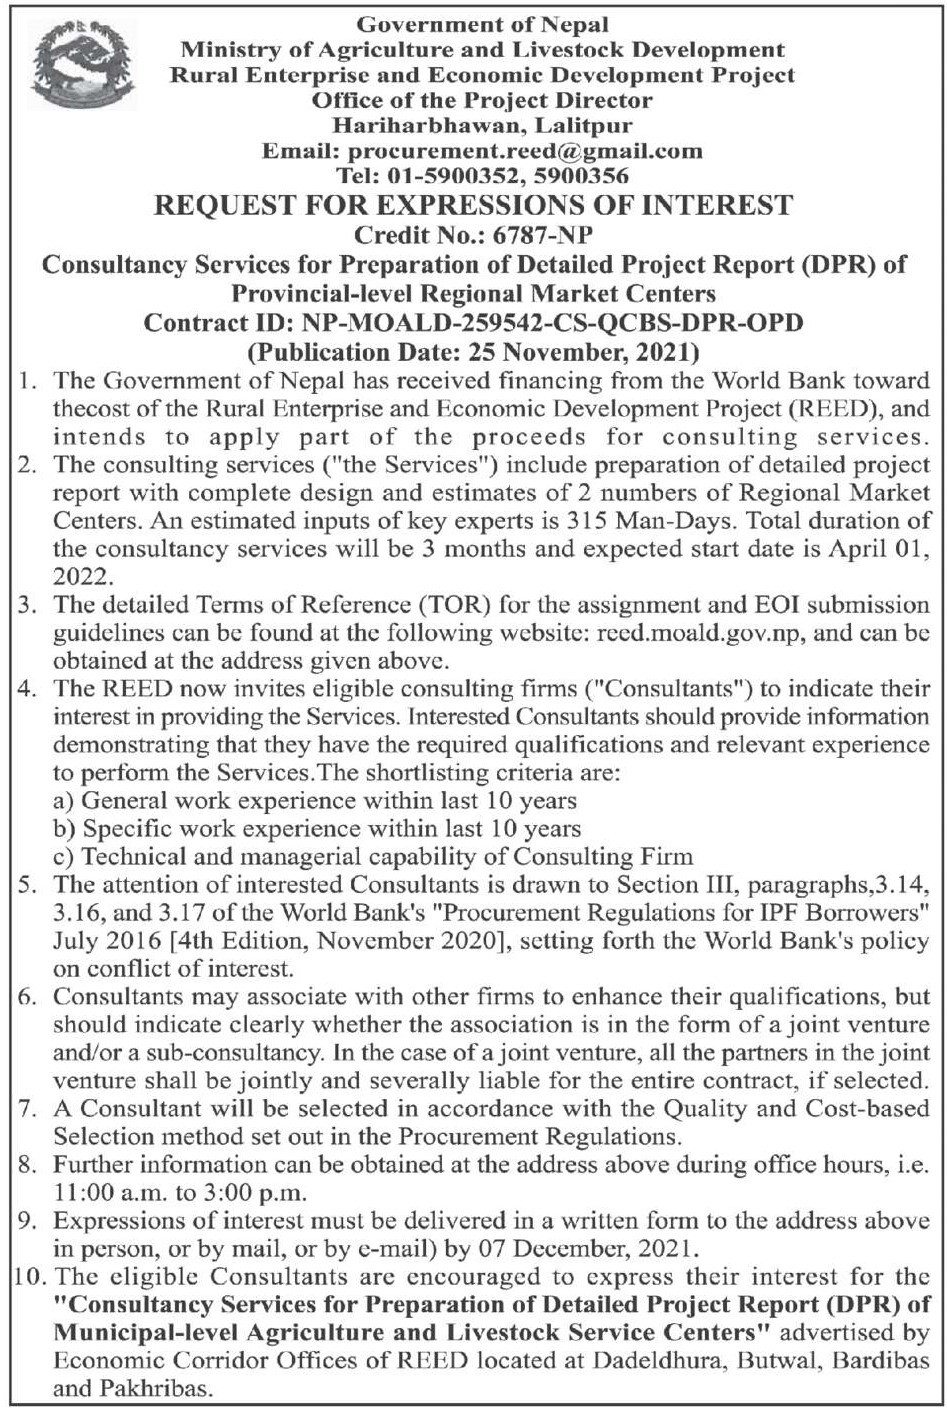 Consultancy Services for Preparation of Detailed Project Report (DPR) of Municipal-level Agriculture and Livestock Service Centers